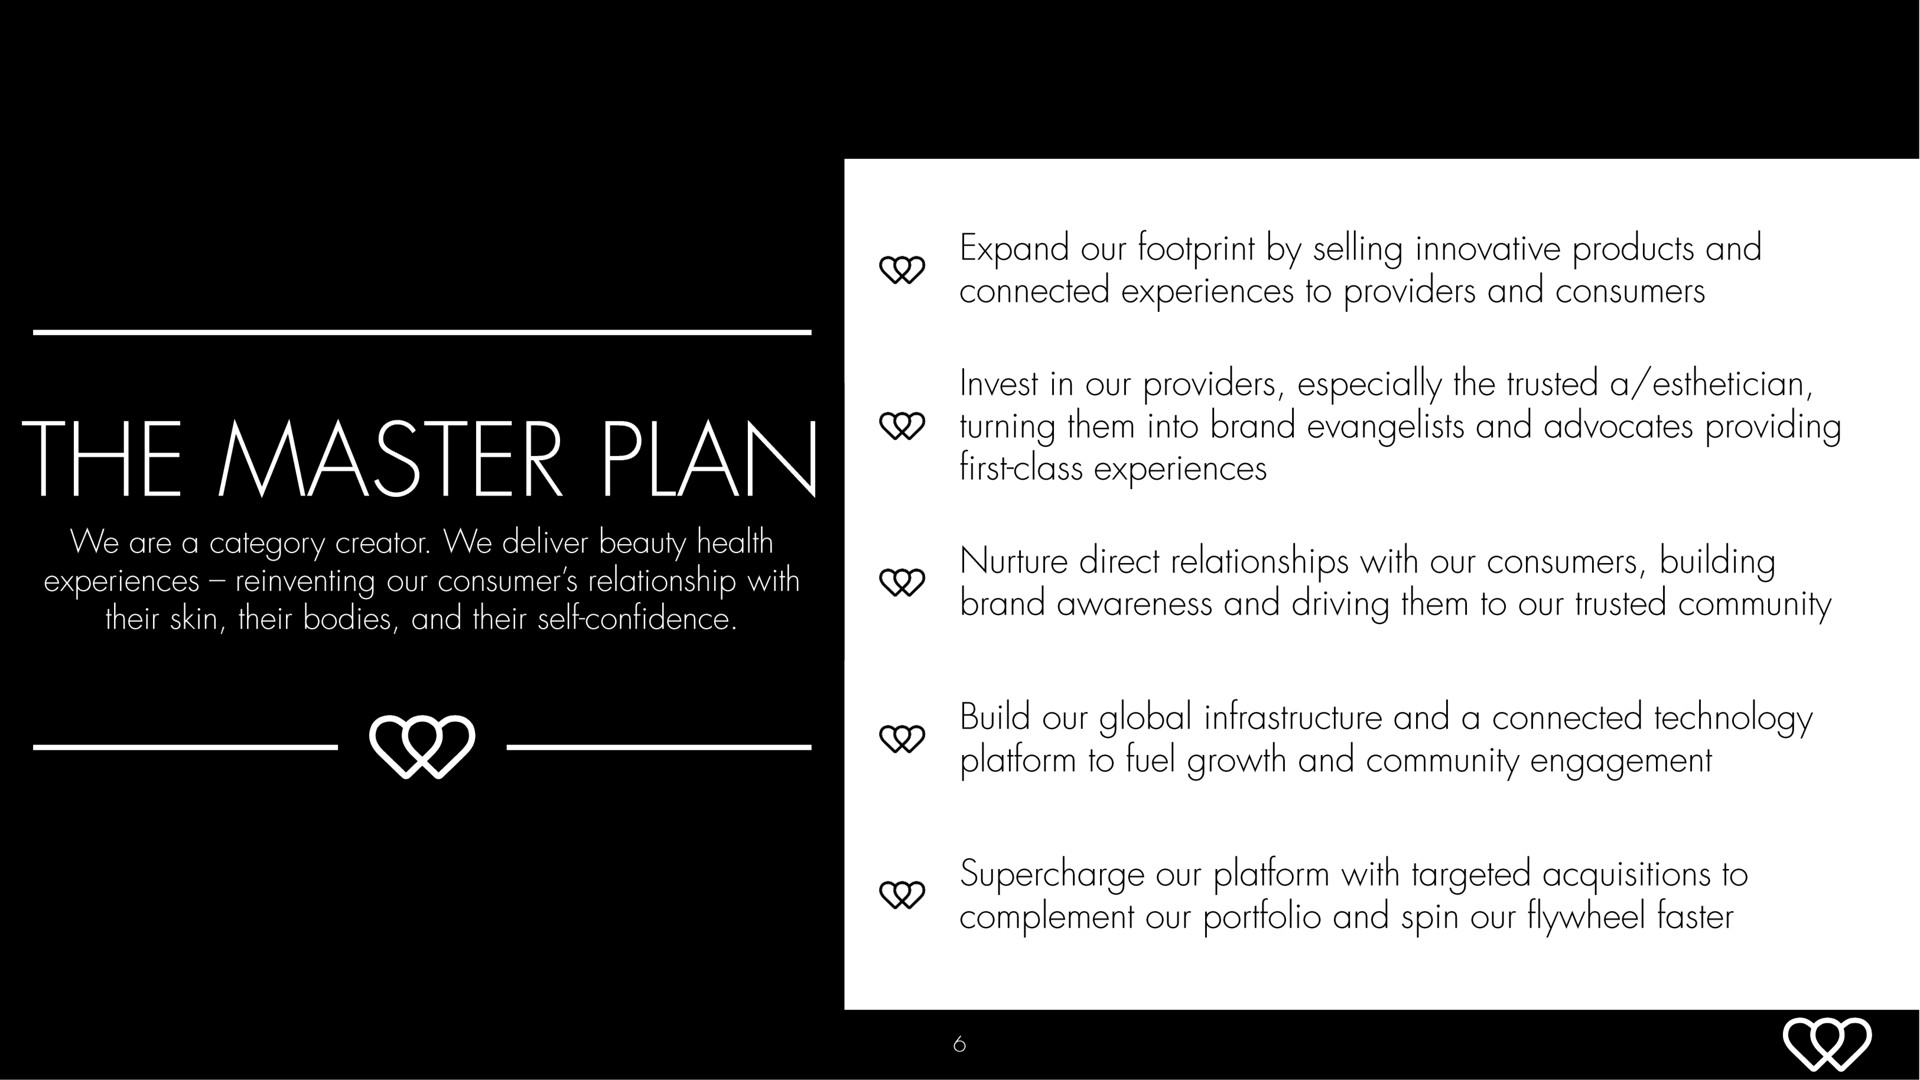 the master plan connected experiences to providers and consumers turning them into brand evangelists and advocates providing nurture direct relationships with our consumers building build our global infrastructure and a connected technology complement our portfolio and spin our flywheel faster | Hydrafacial